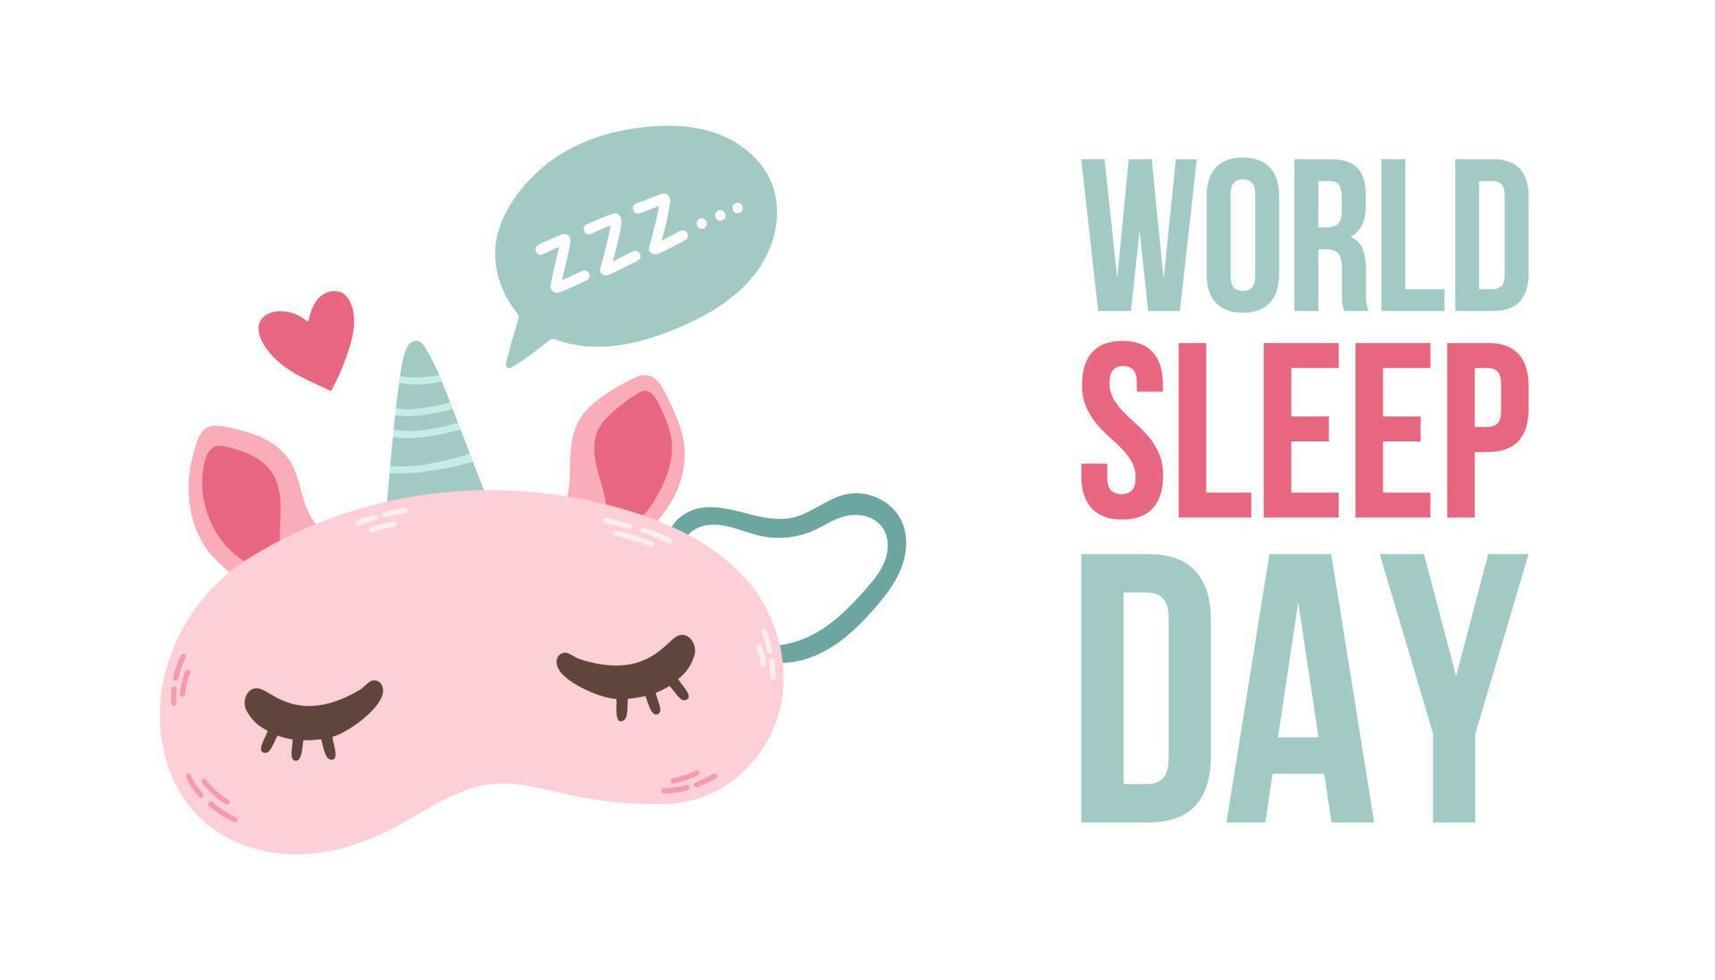 World Sleep Day postcard or banner. Vector illustration of a cute sleeping mask with text on an international holiday